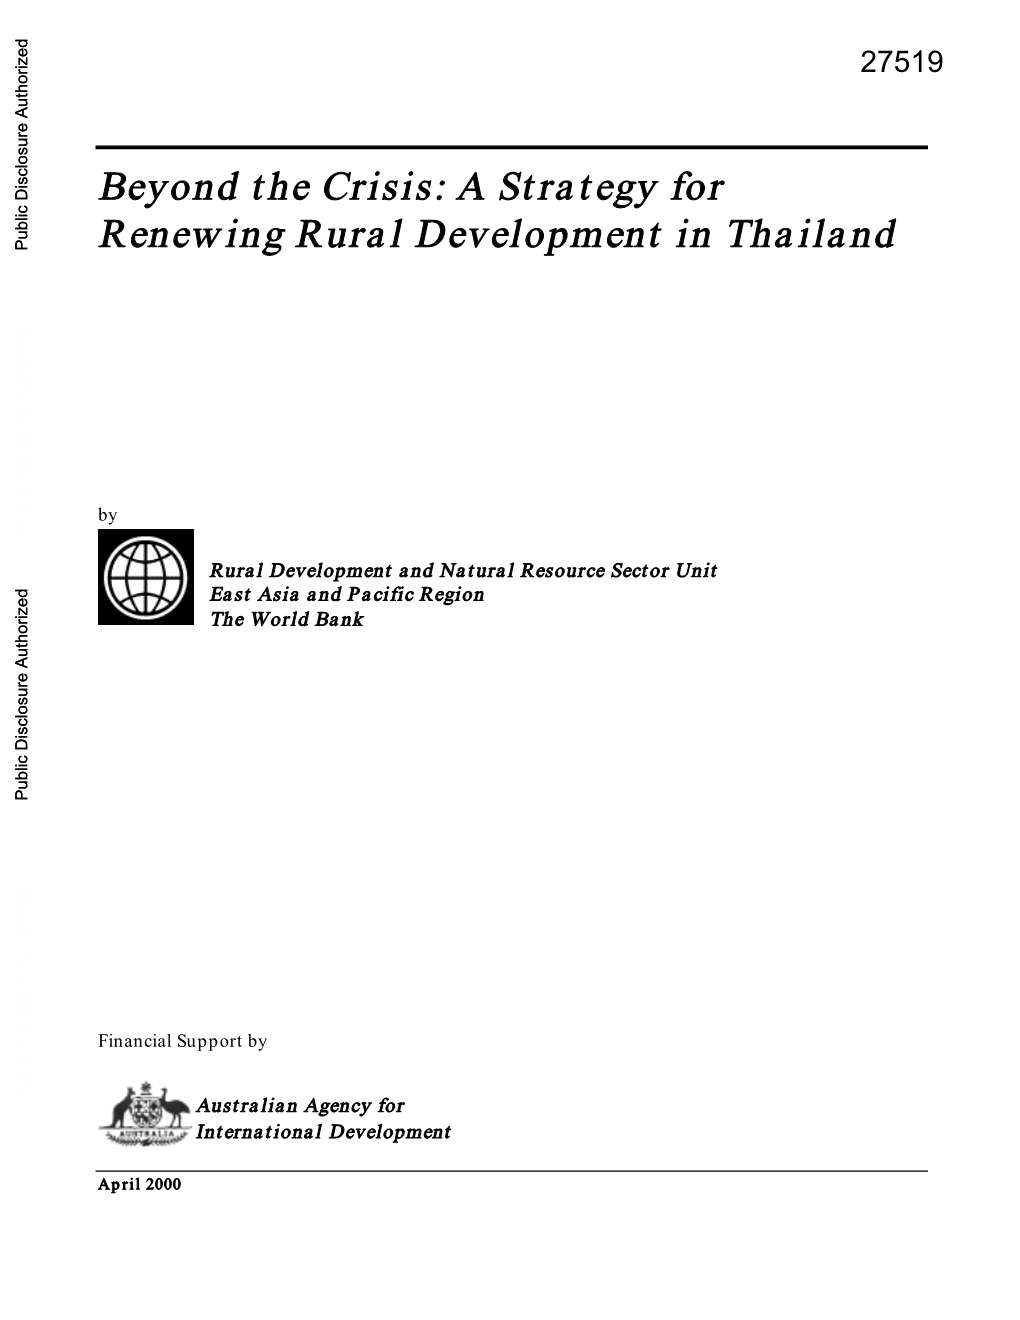 Beyond the Crisis: a Strategy for Renewing